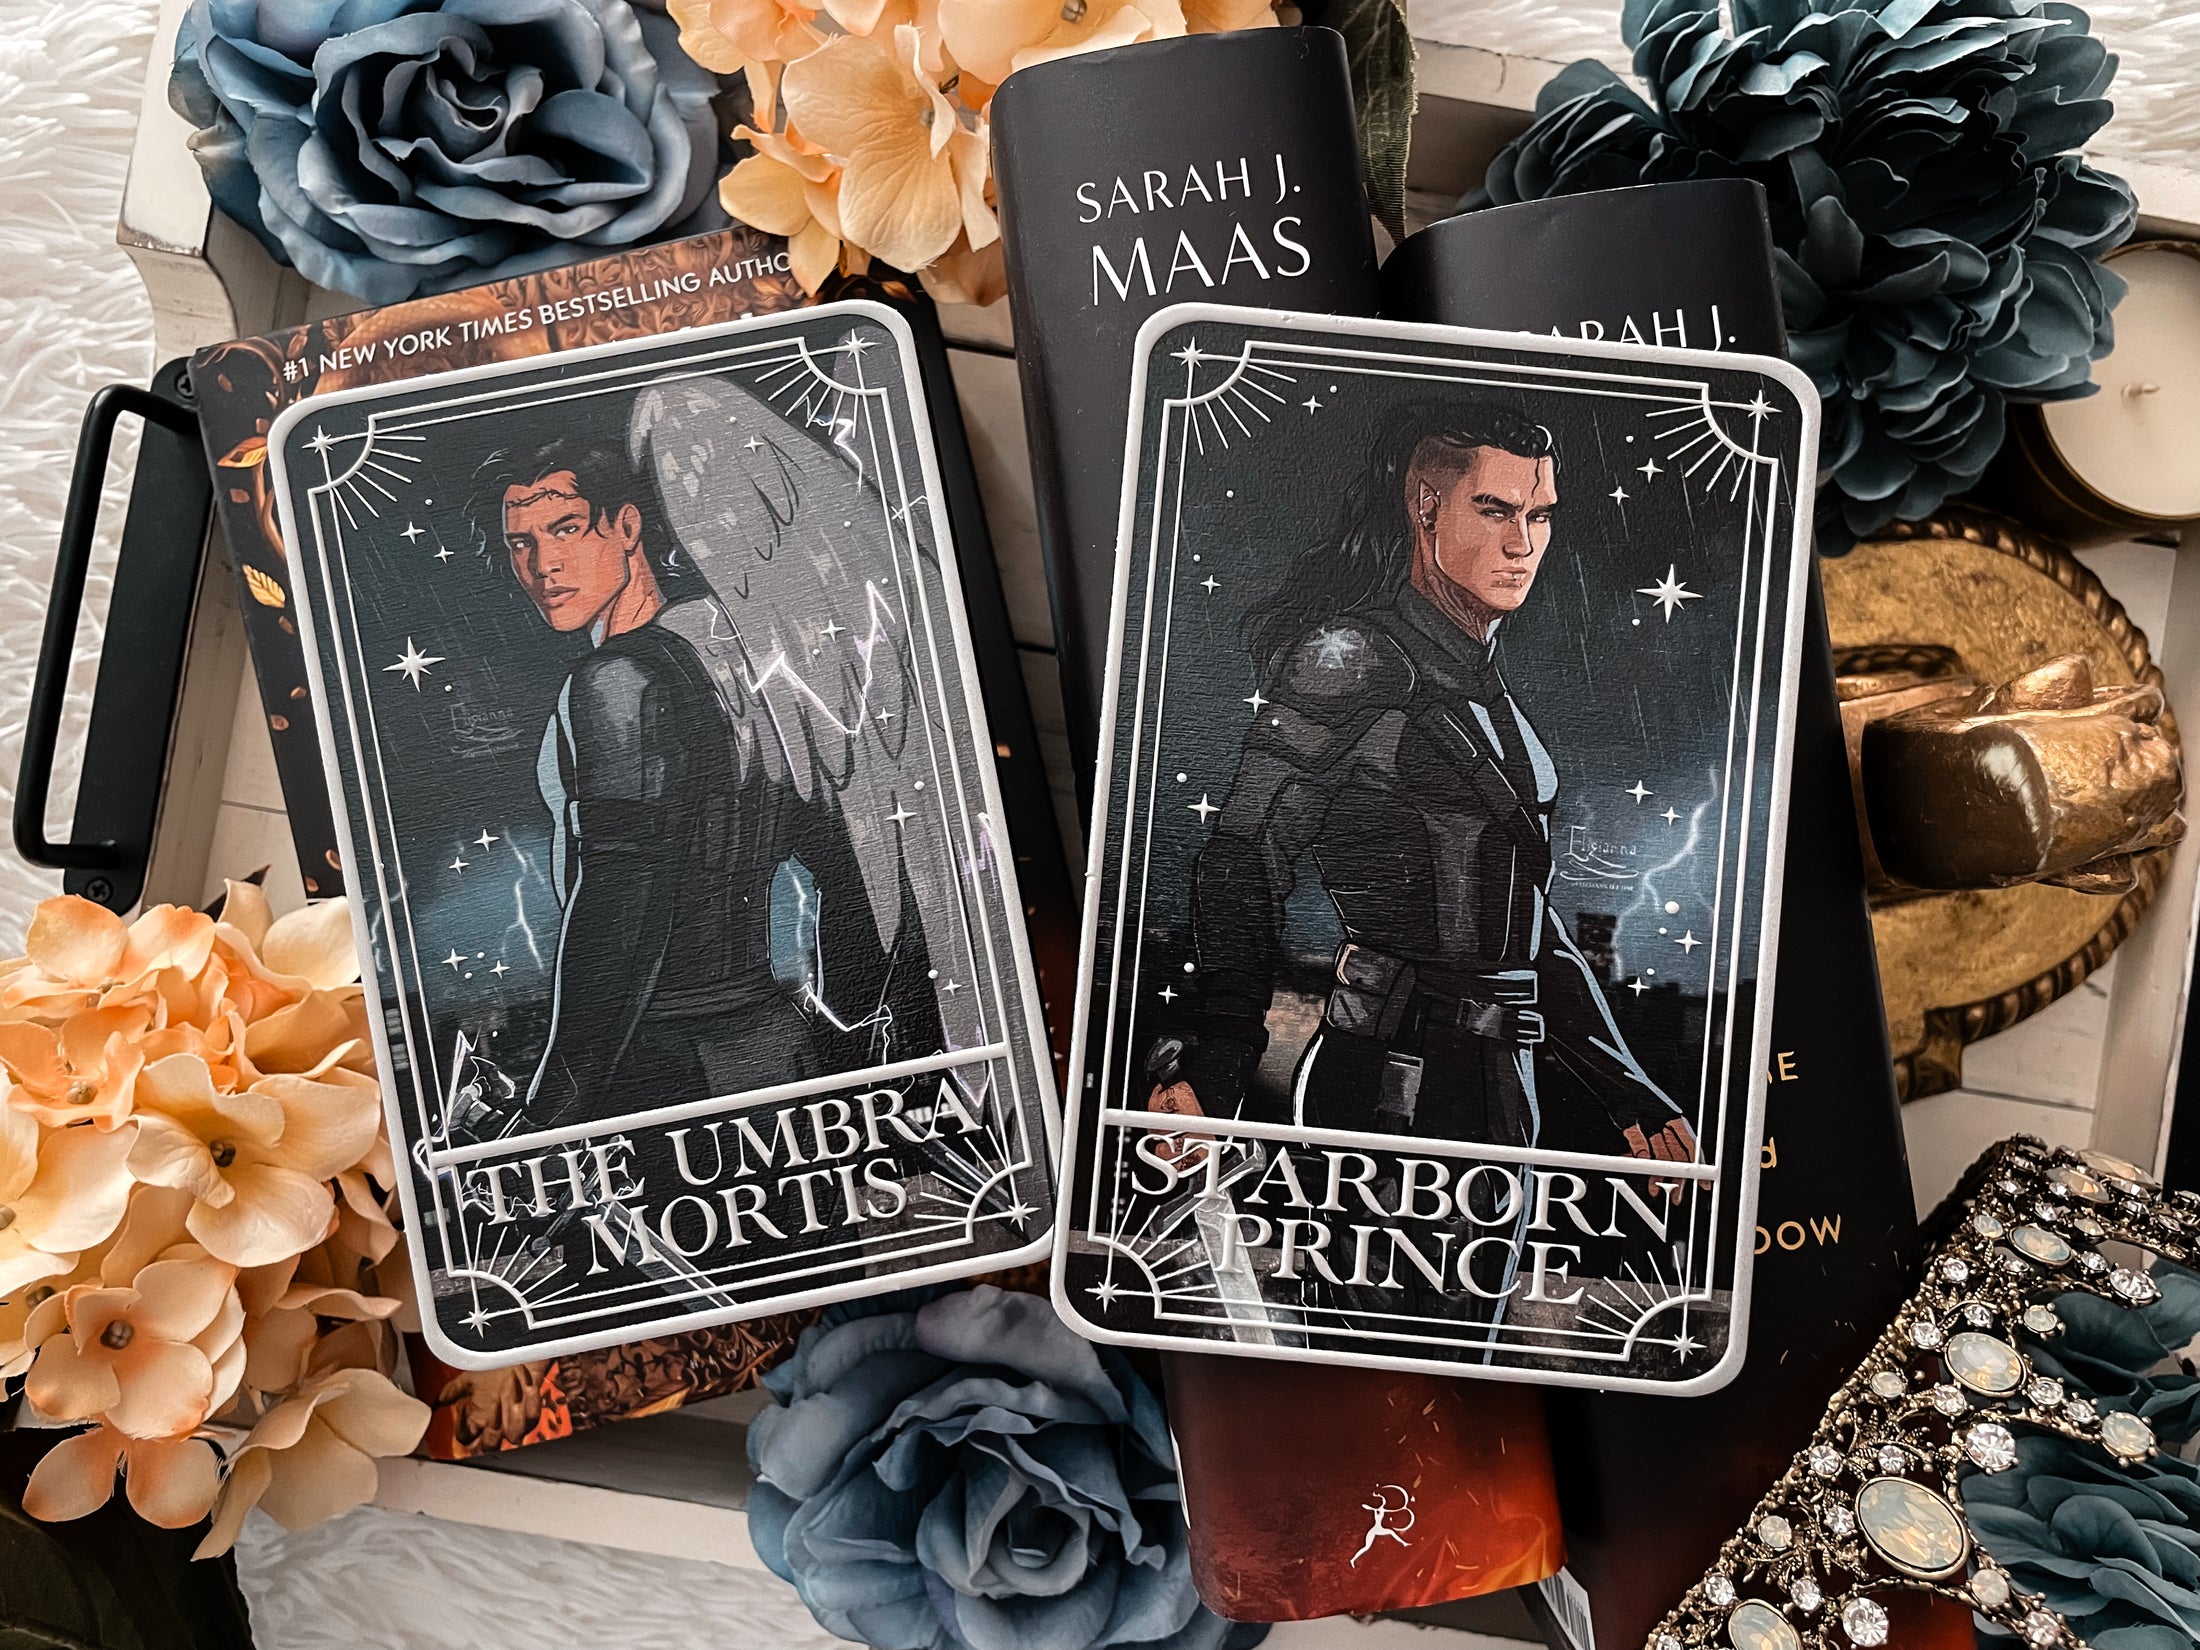 Officially Licensed SJM - Ruhn "Starborn Prince" and "The Umbra Mortis" Character Cards by FireDrake Artistry™